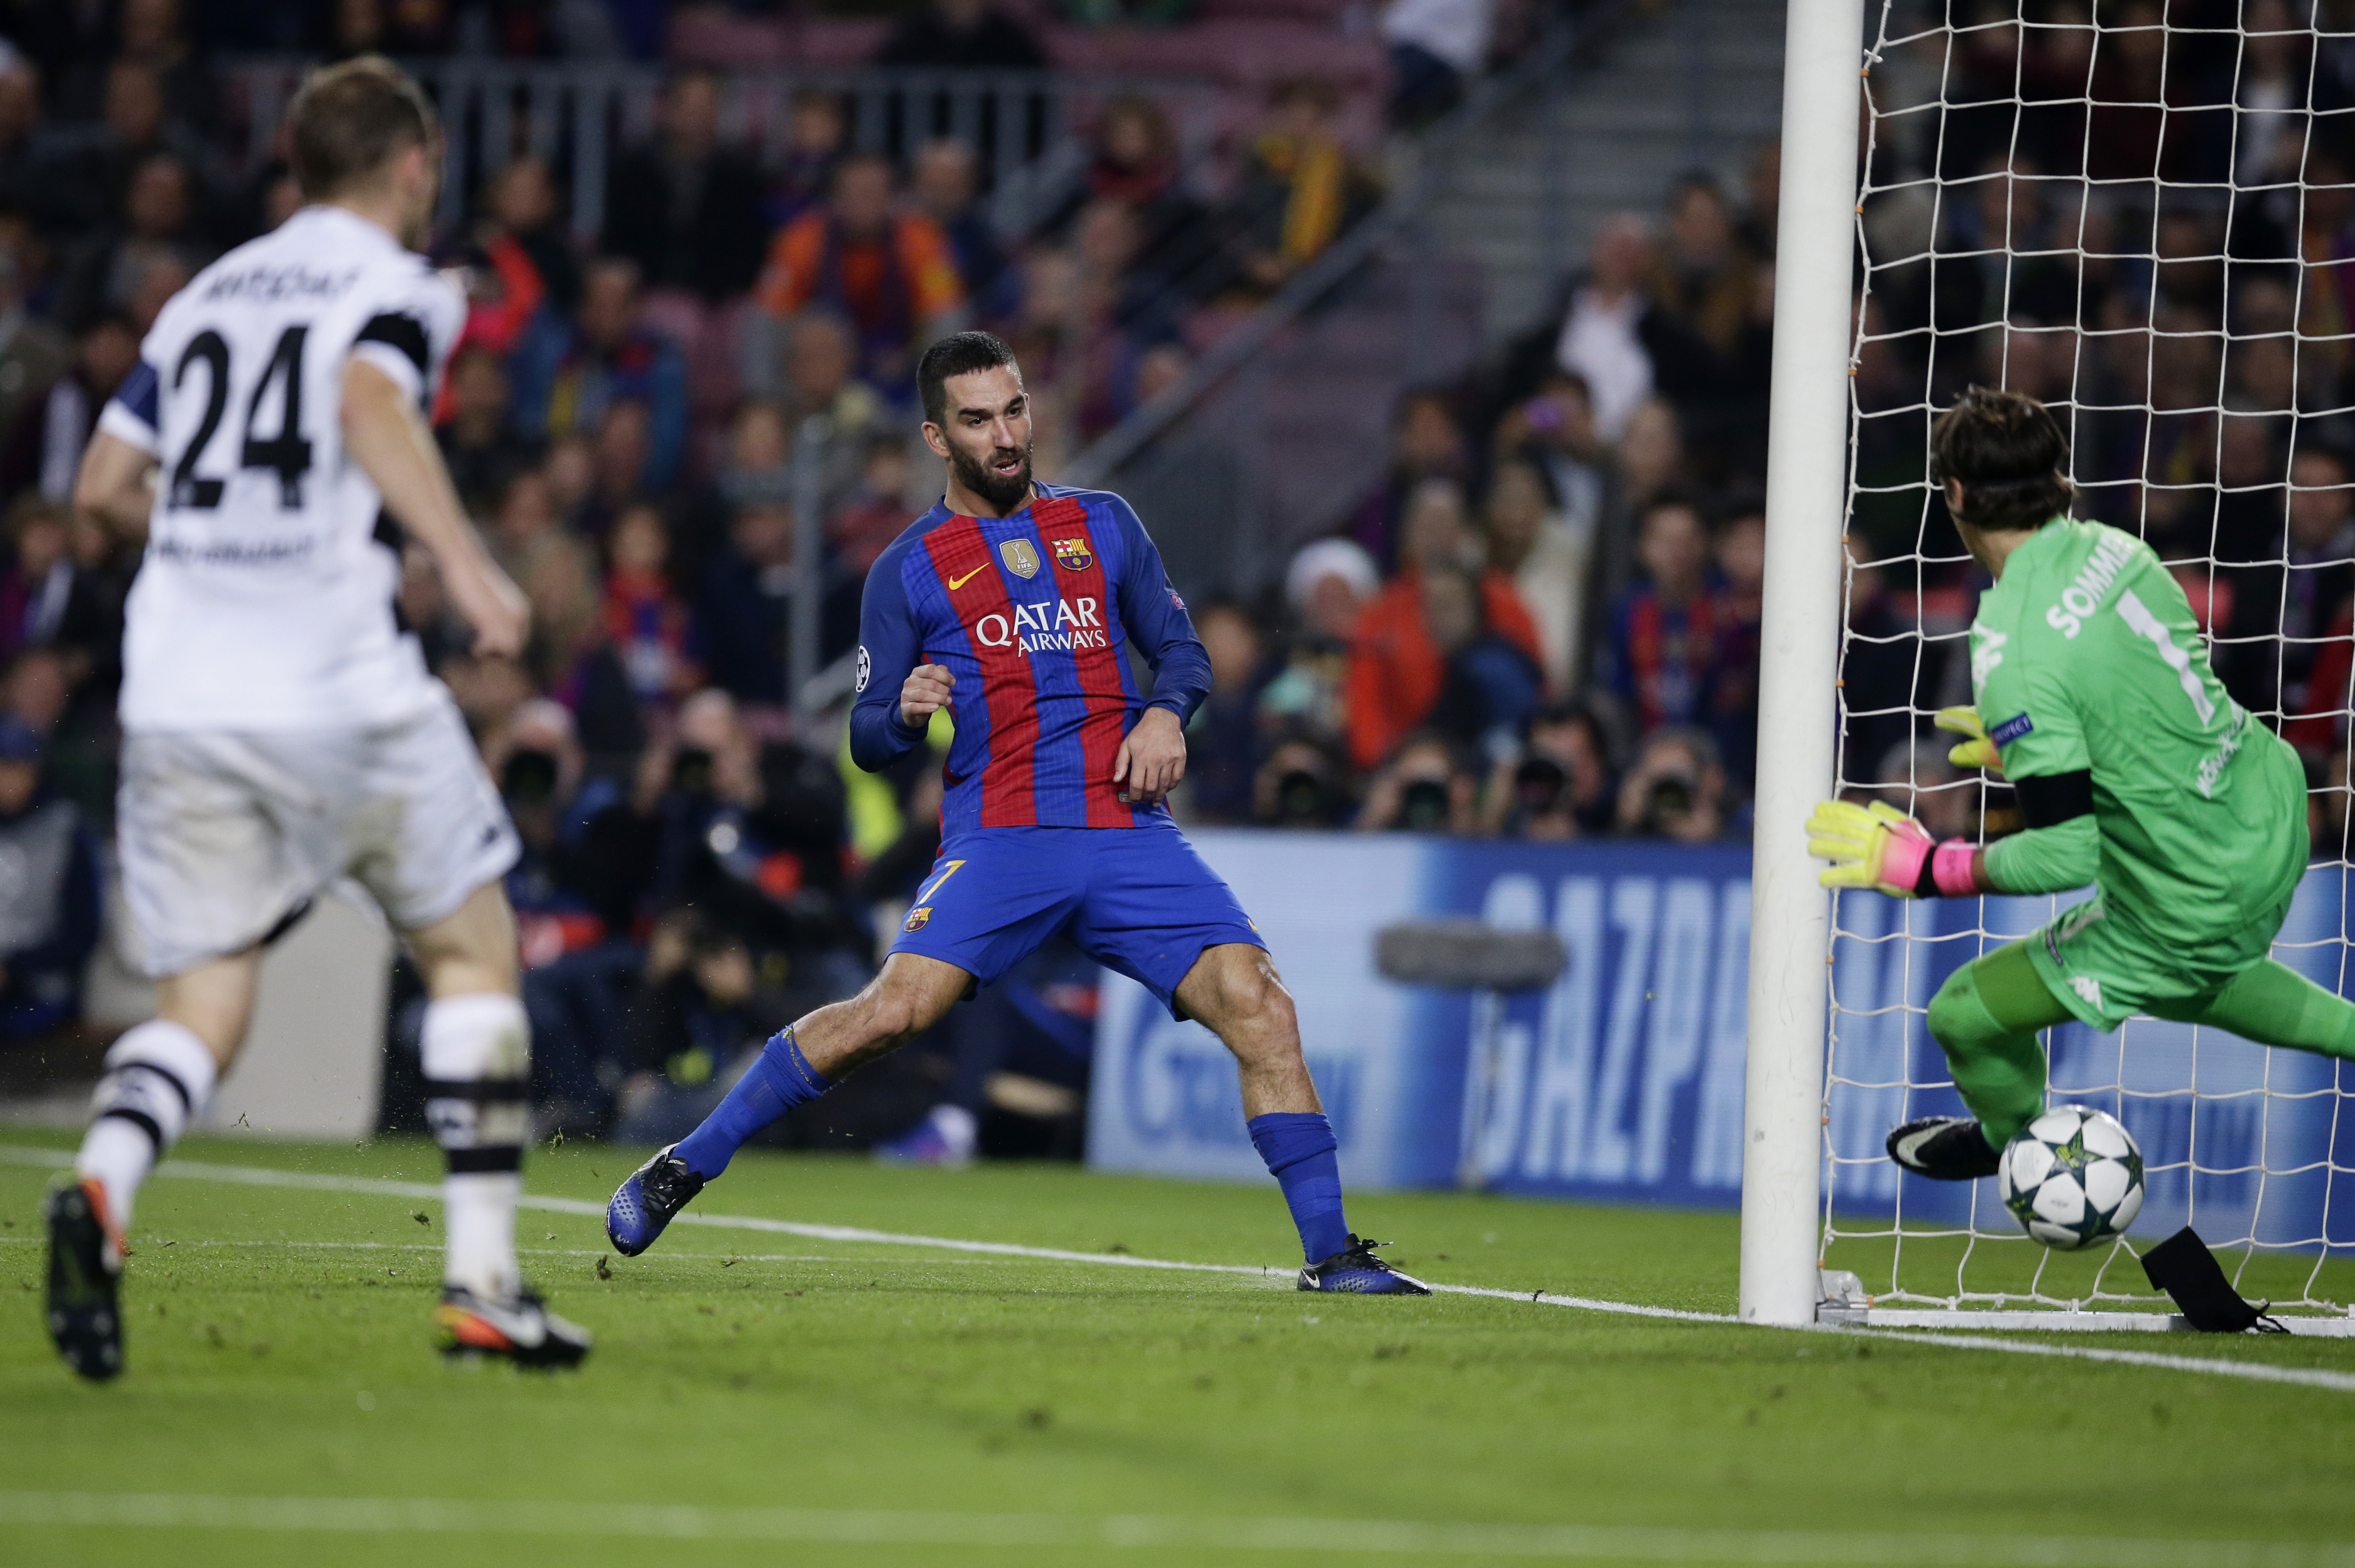 Barcelona matches 20-goal scoring record in Champions League | Inquirer ... 